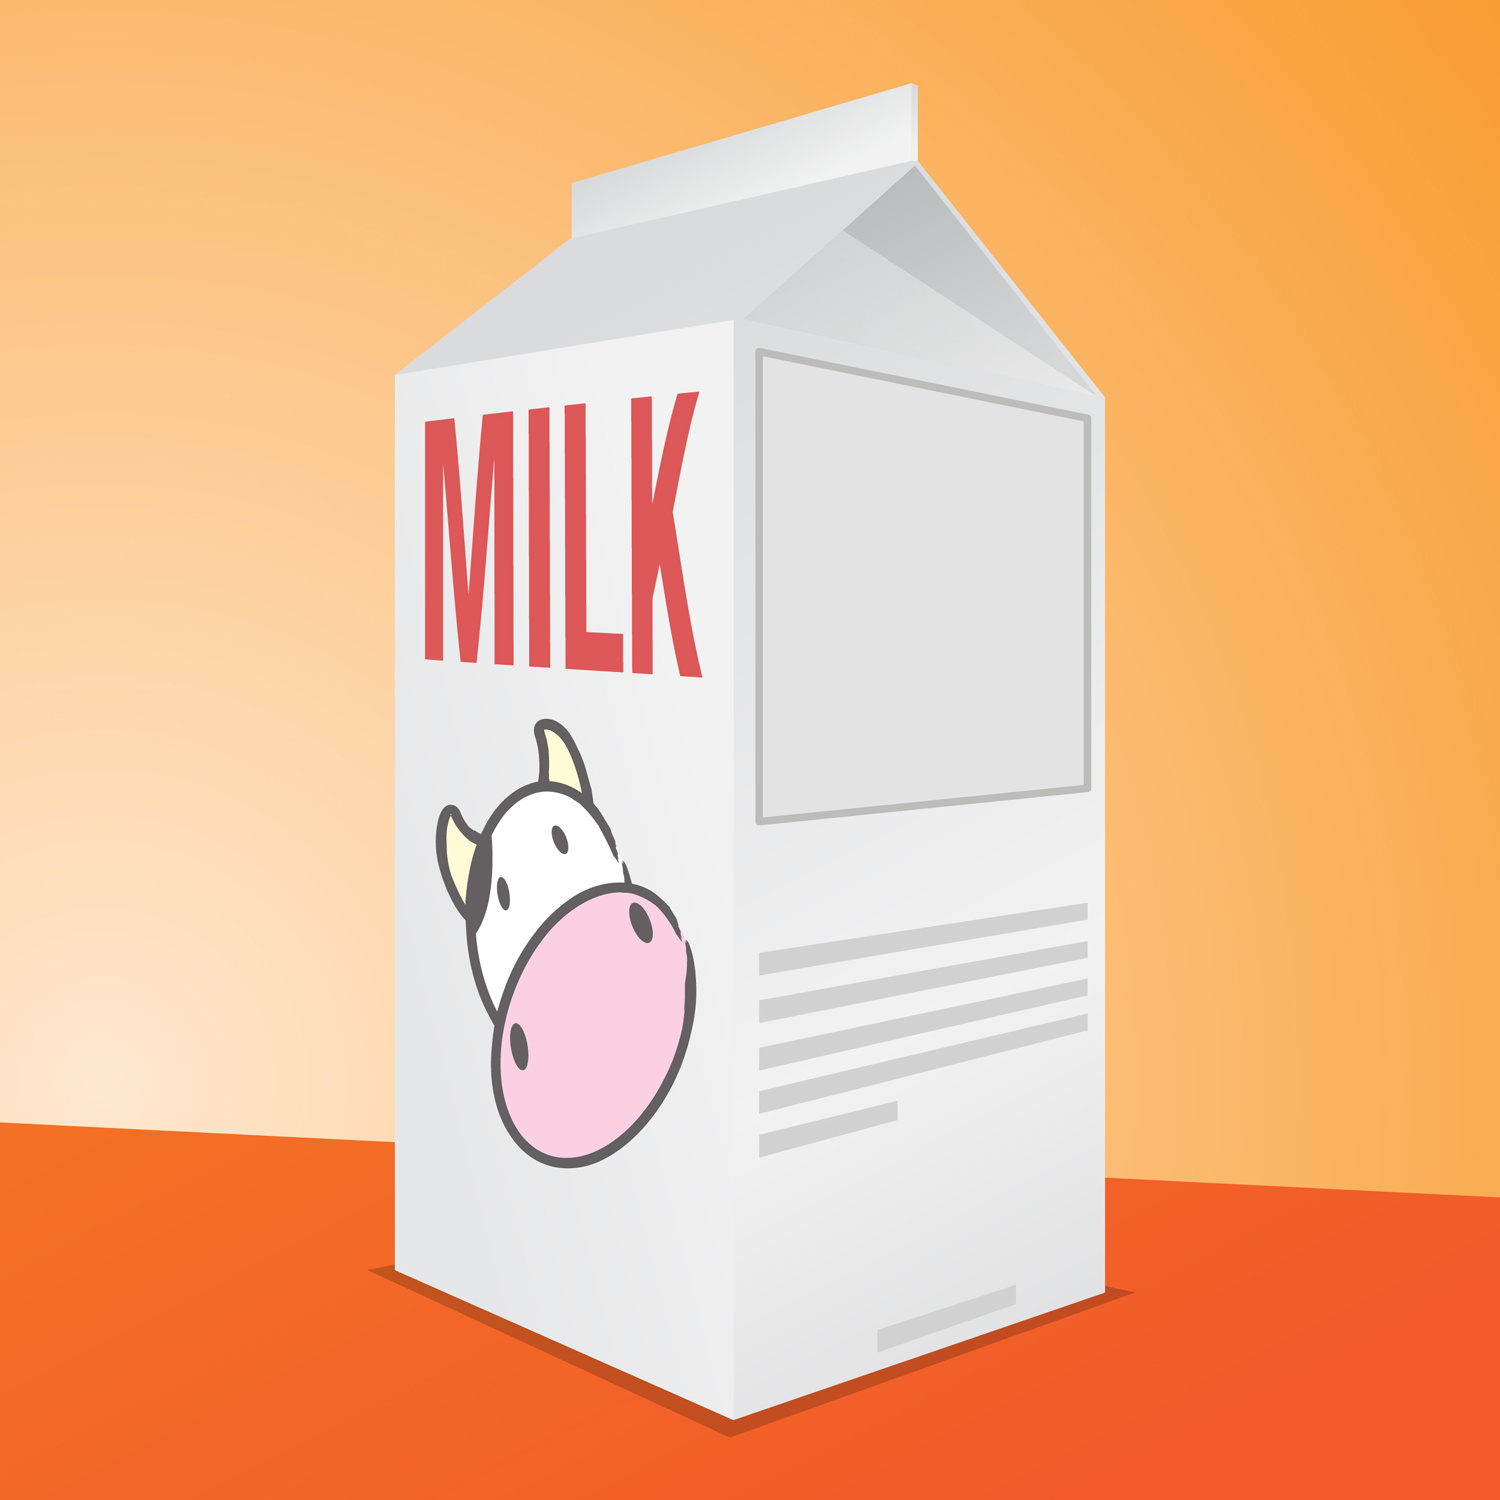 Tags: white, milk, carton, red, cute, cow, cartoon, blank, space, message, missing, template, orange, background